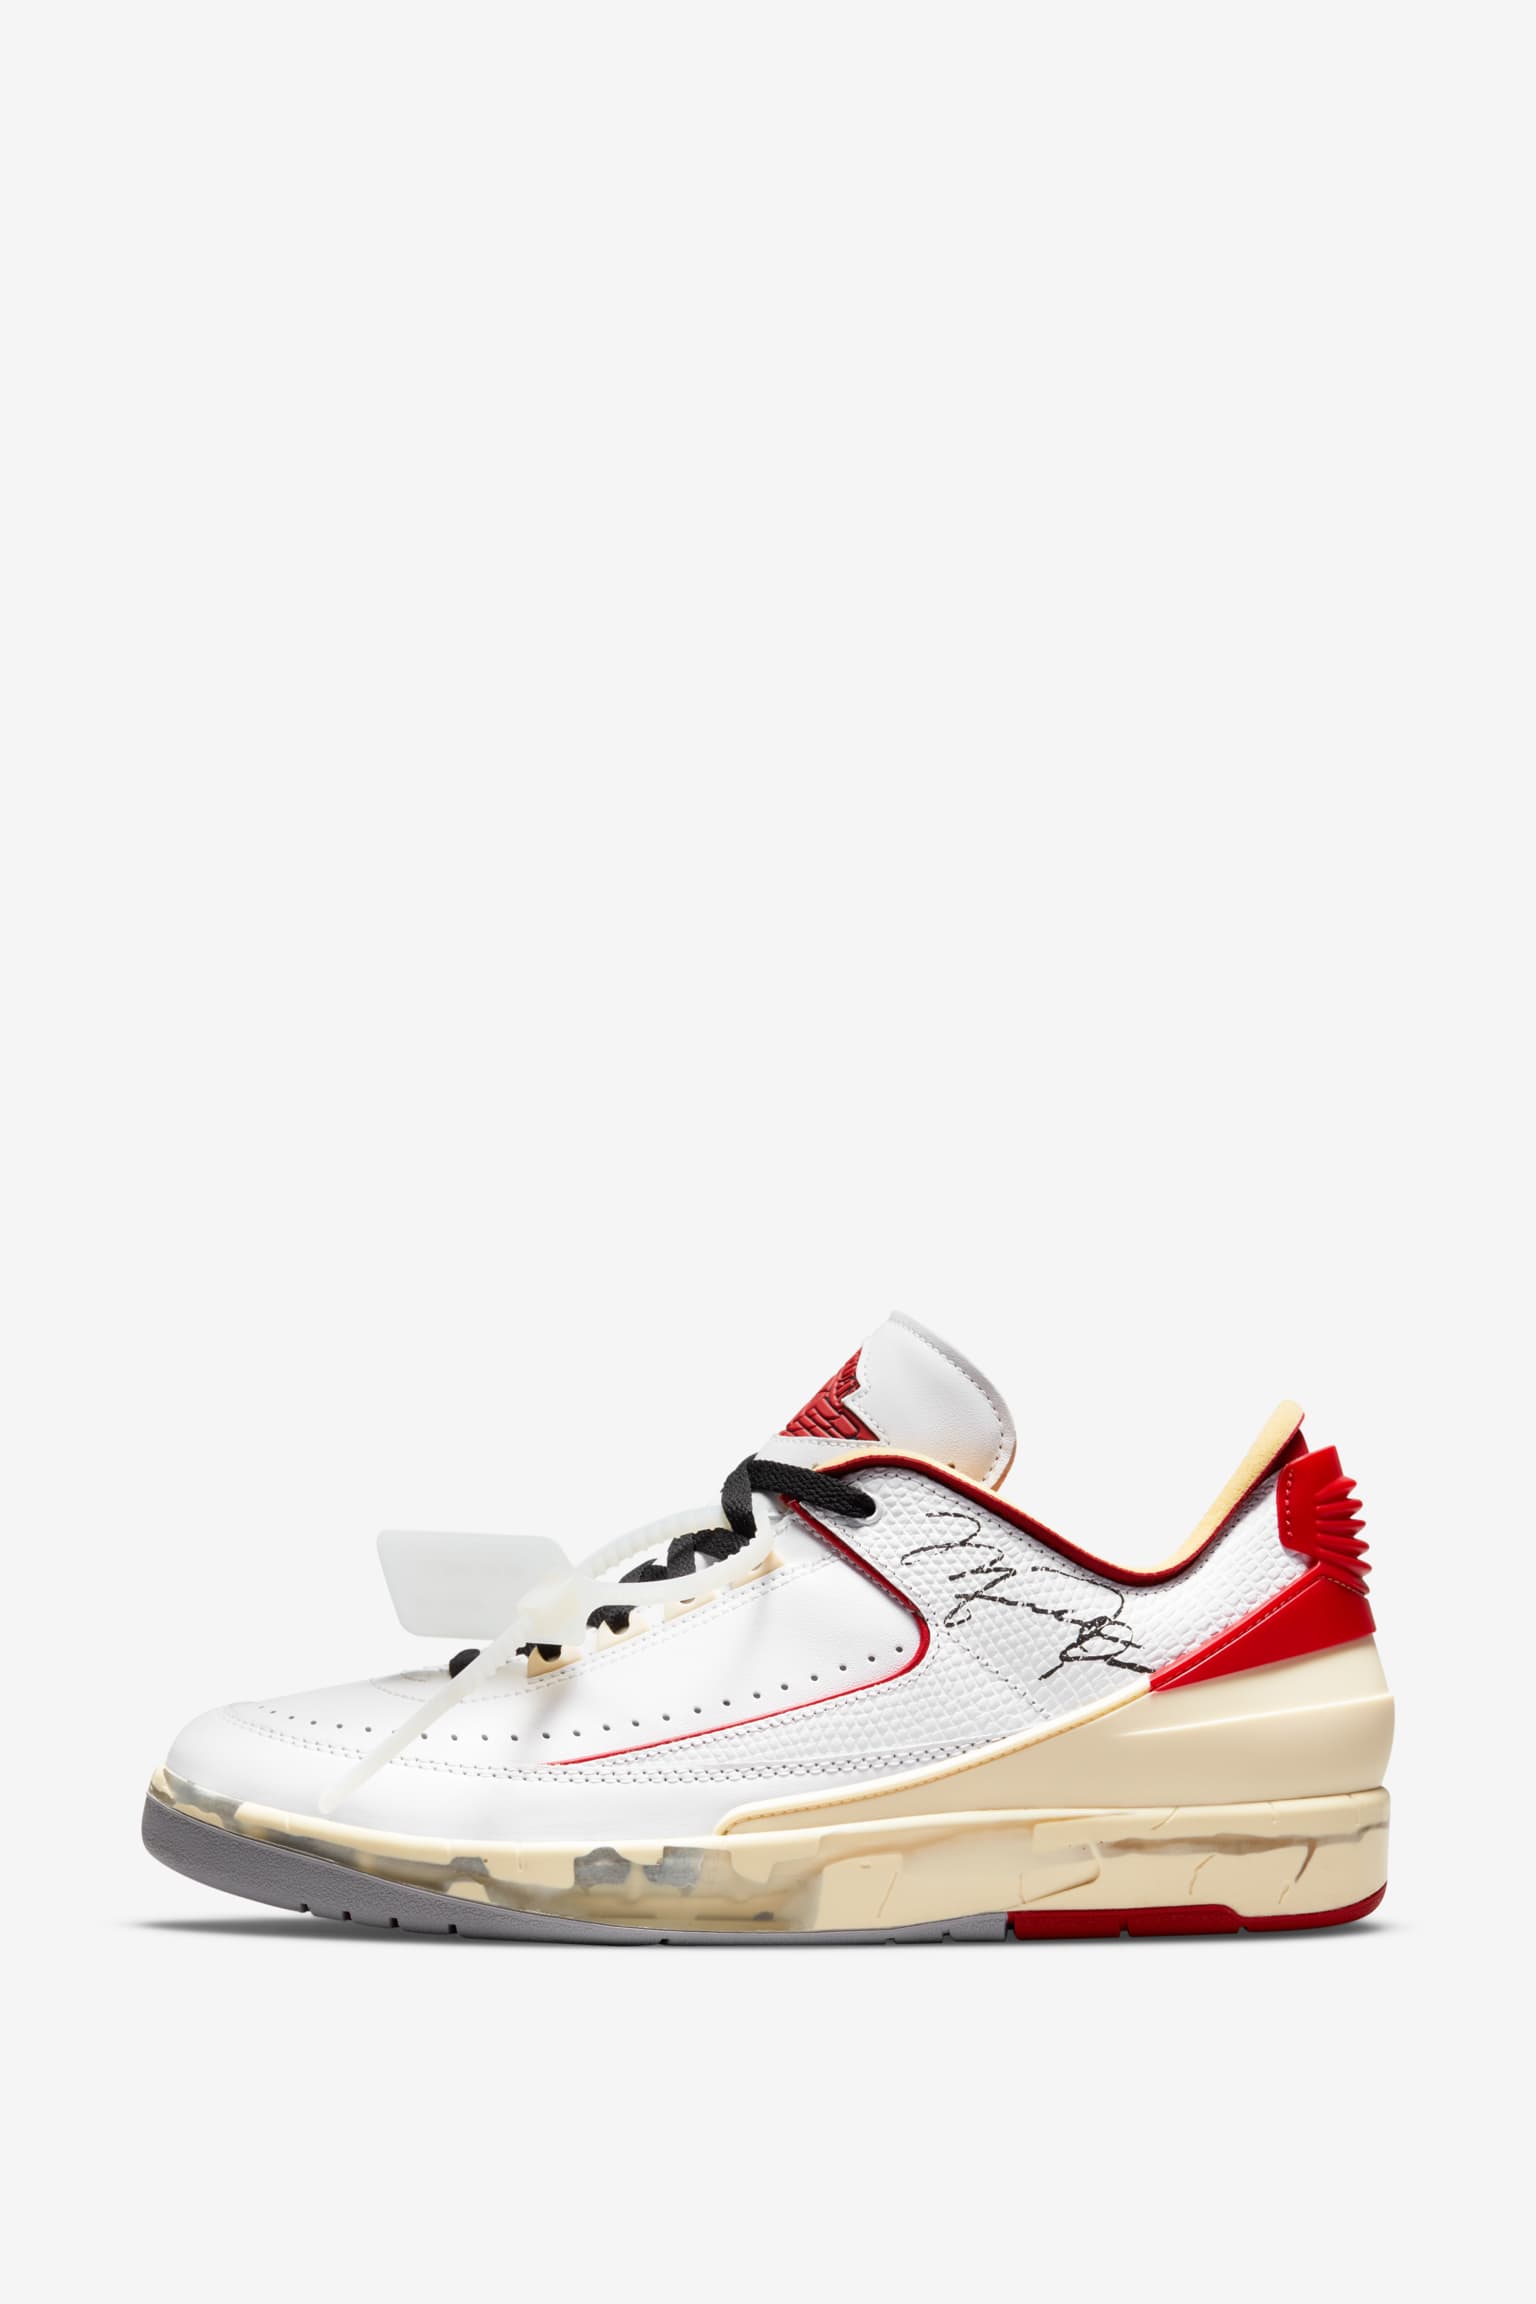 Air Jordan 2 Low x Off-White™️ 'White and Varsity Red' (DJ4375-106) Release  Date. Nike SNKRS US